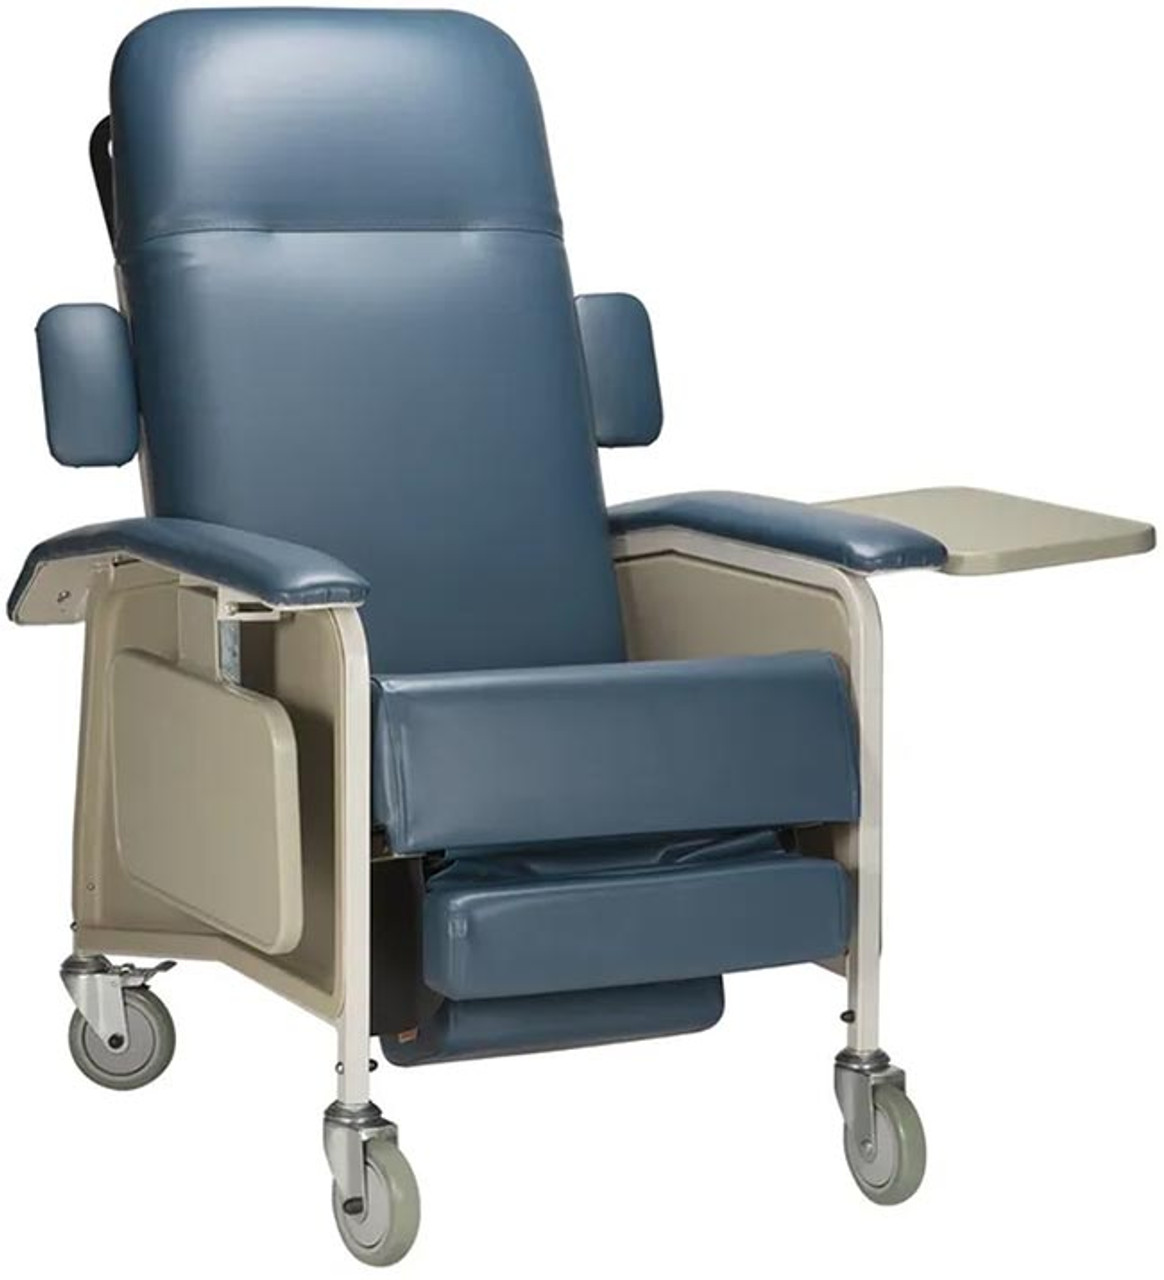 Hospital Recliner Chair With Wheels Clinical Care Recliner